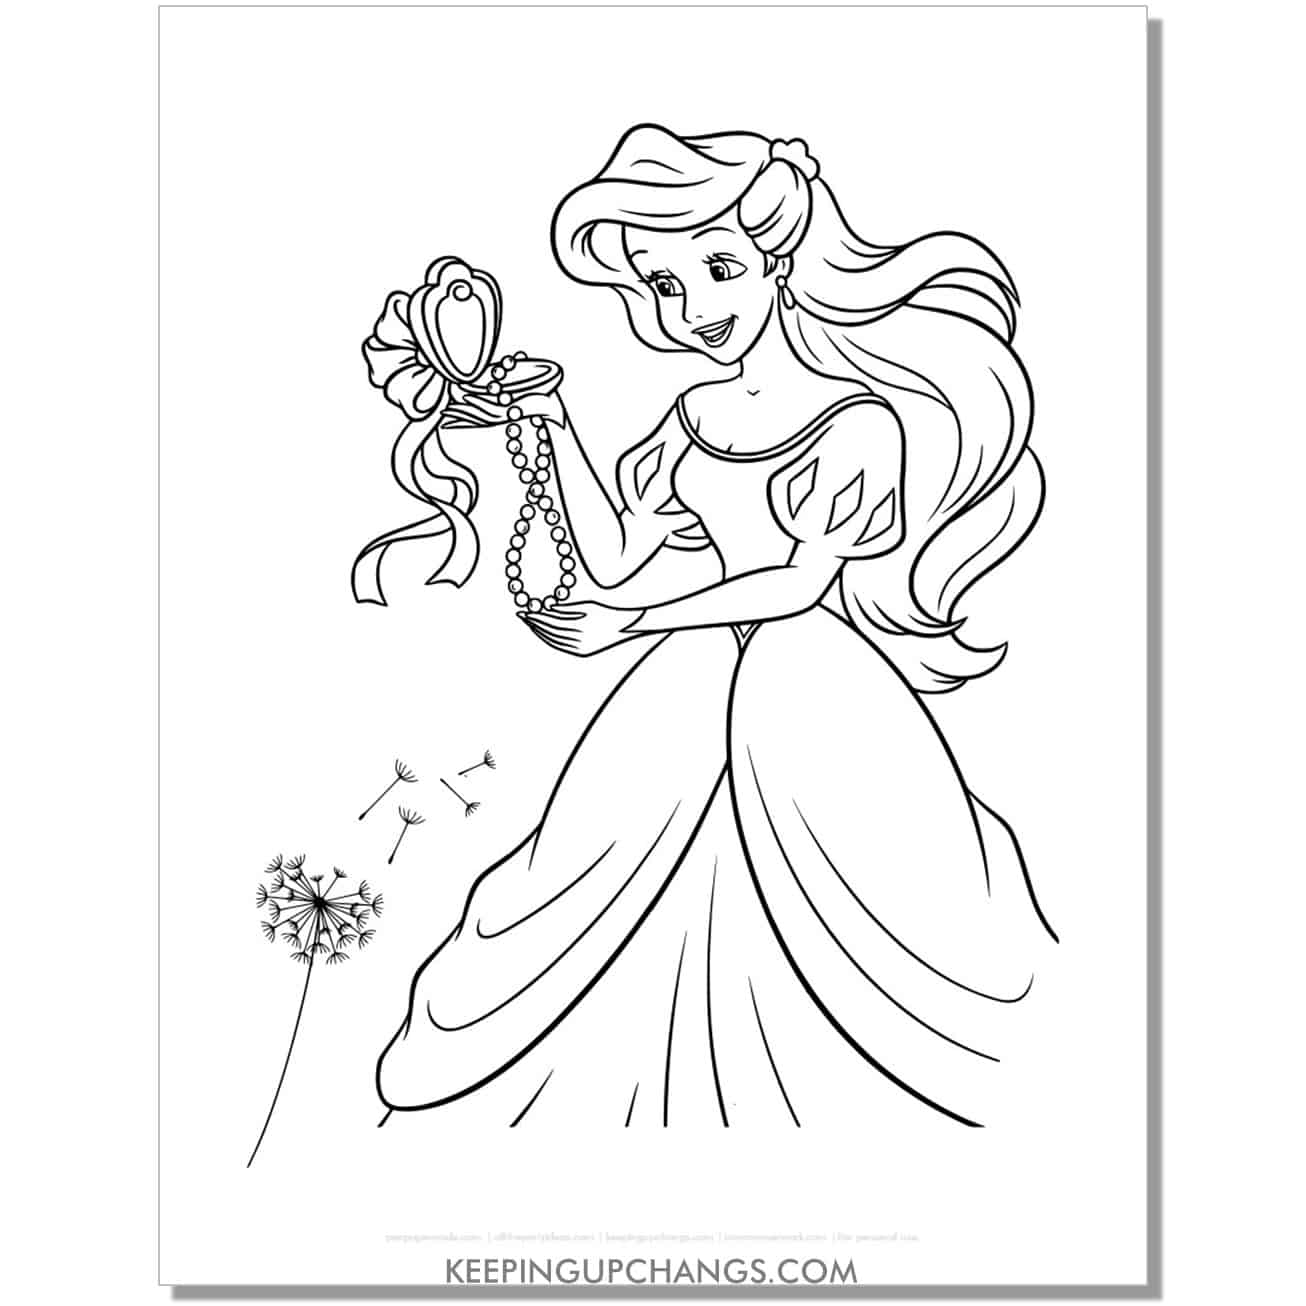 little mermaid ariel with pearl necklace, compact mirror coloring page, sheet.